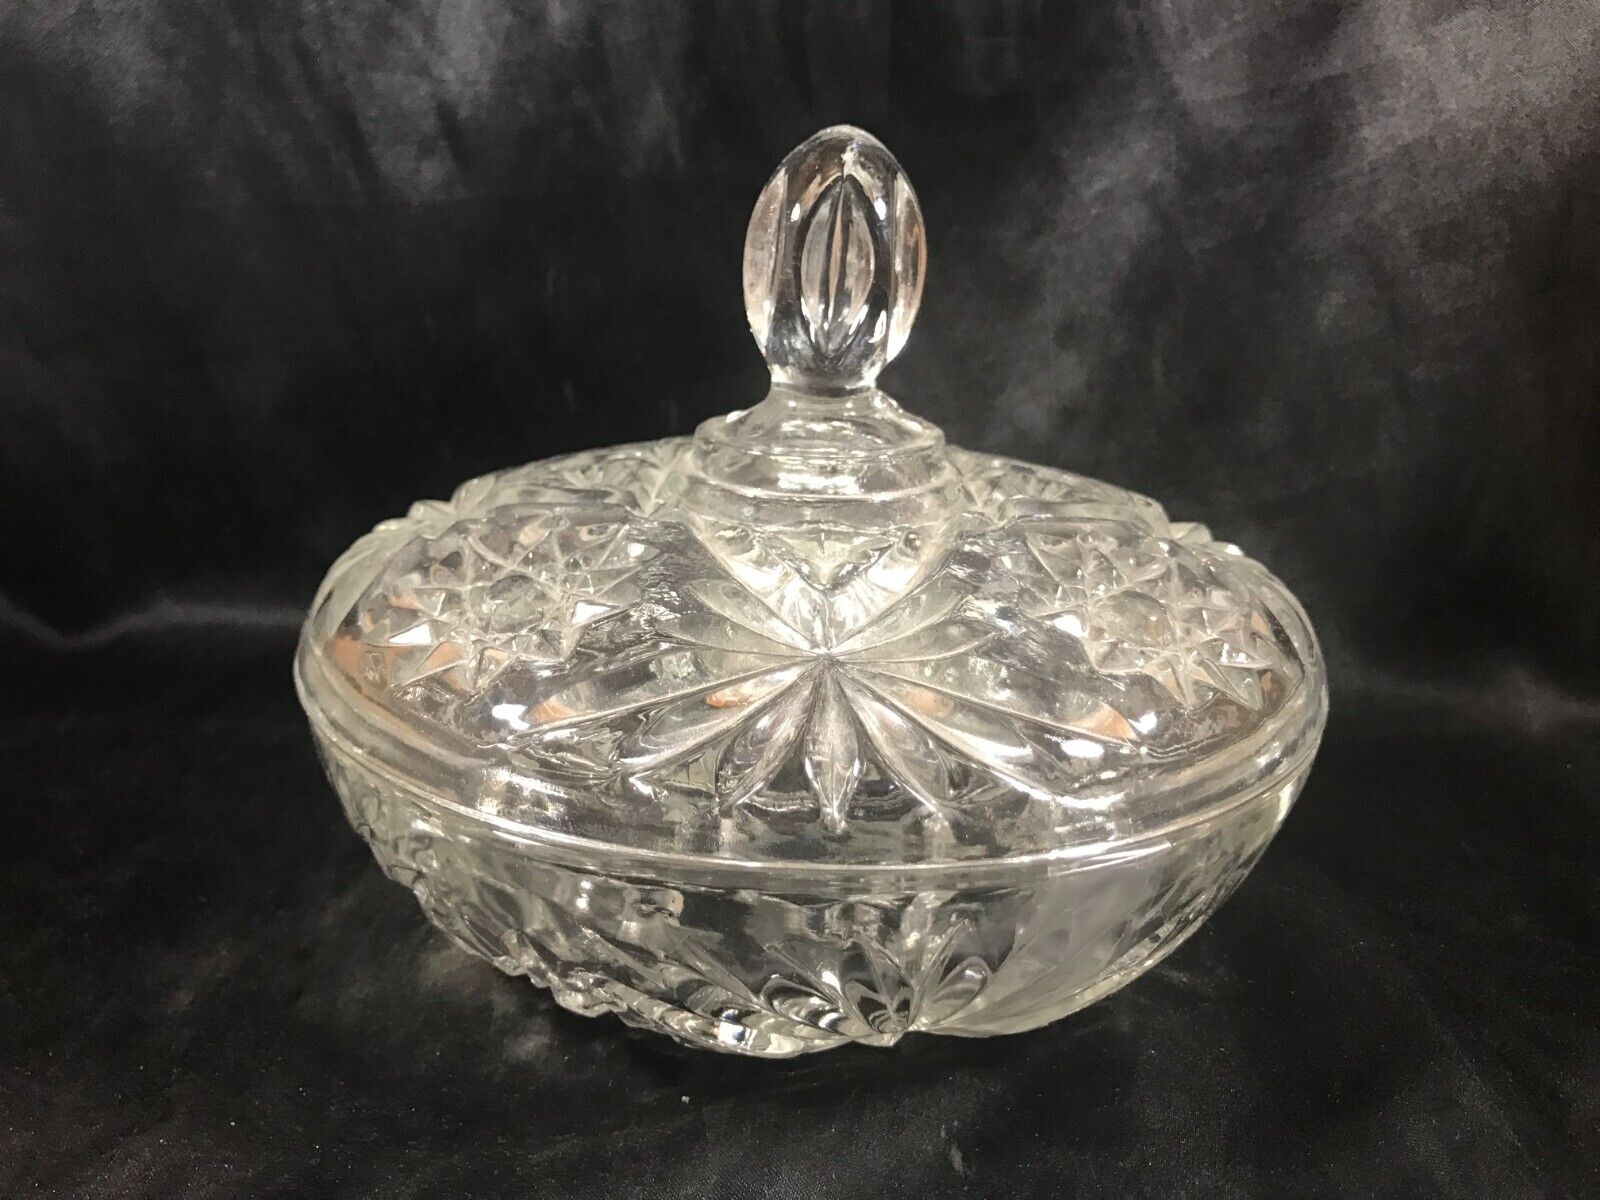 Vintage Anchor Hocking EAPC Clear Glass 7-1/4” Covered Candy Dish Bowl